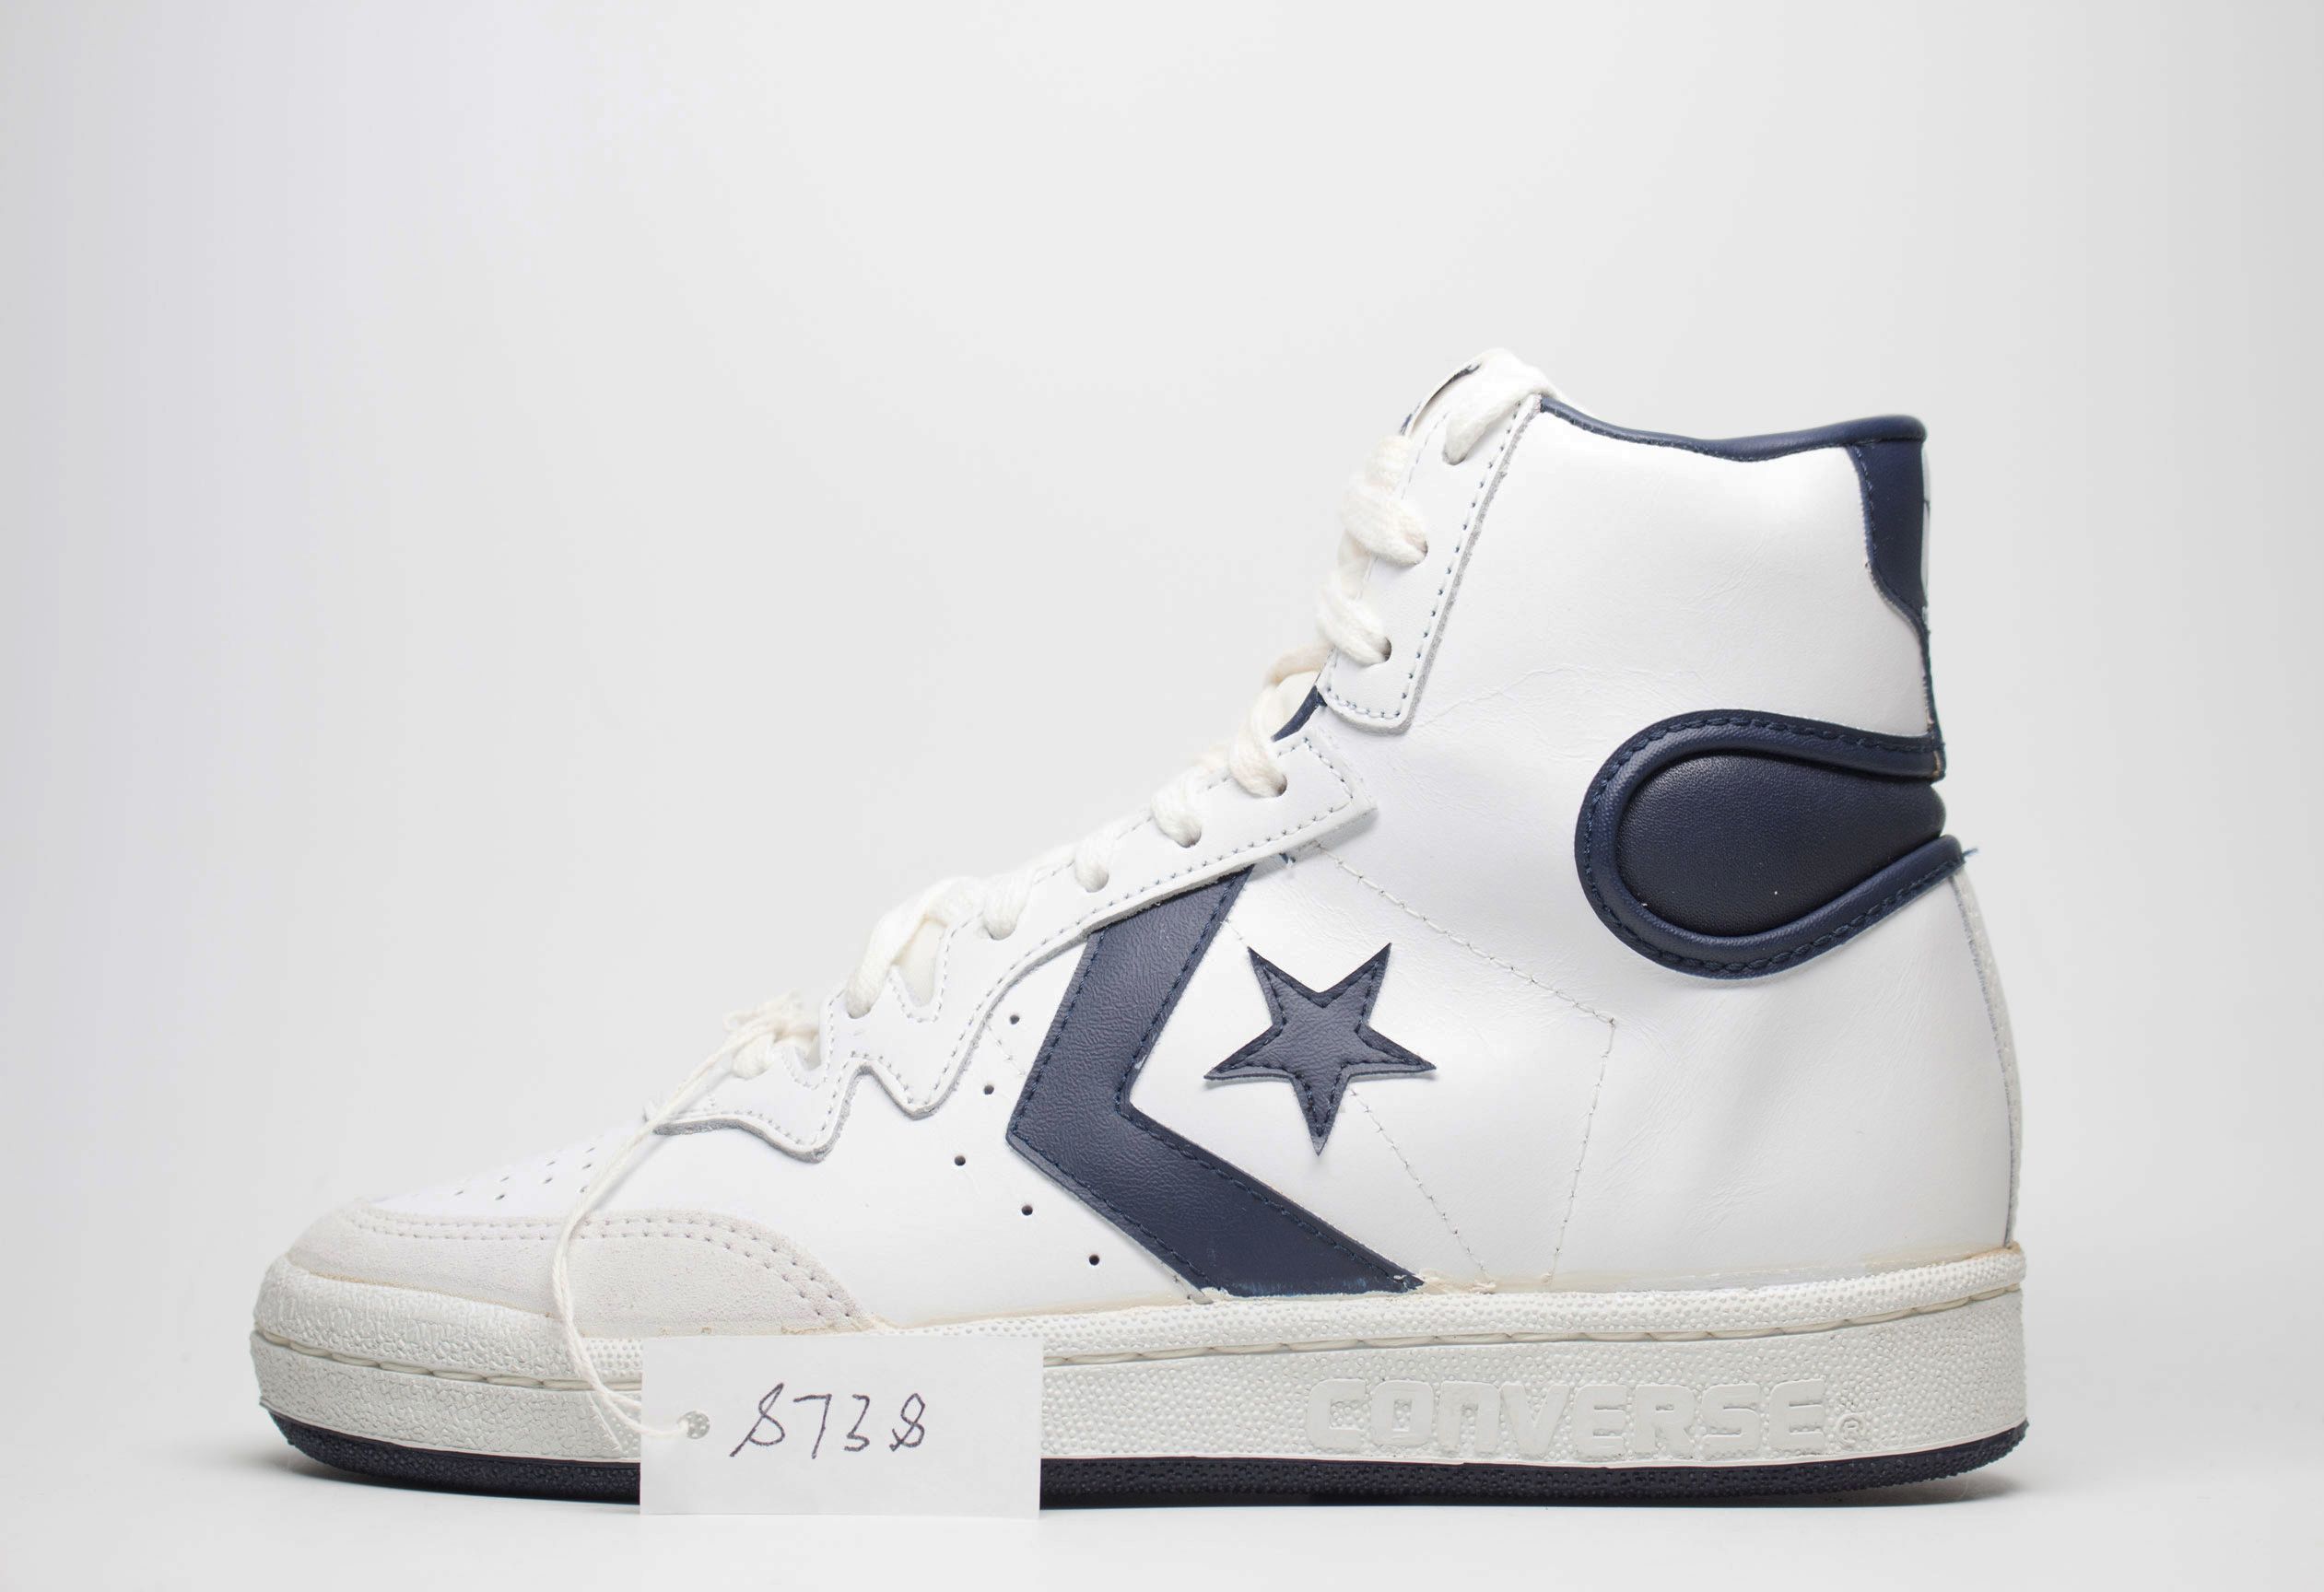 15 Images of Converse's Most Iconic Basketball Sneakers of All Time